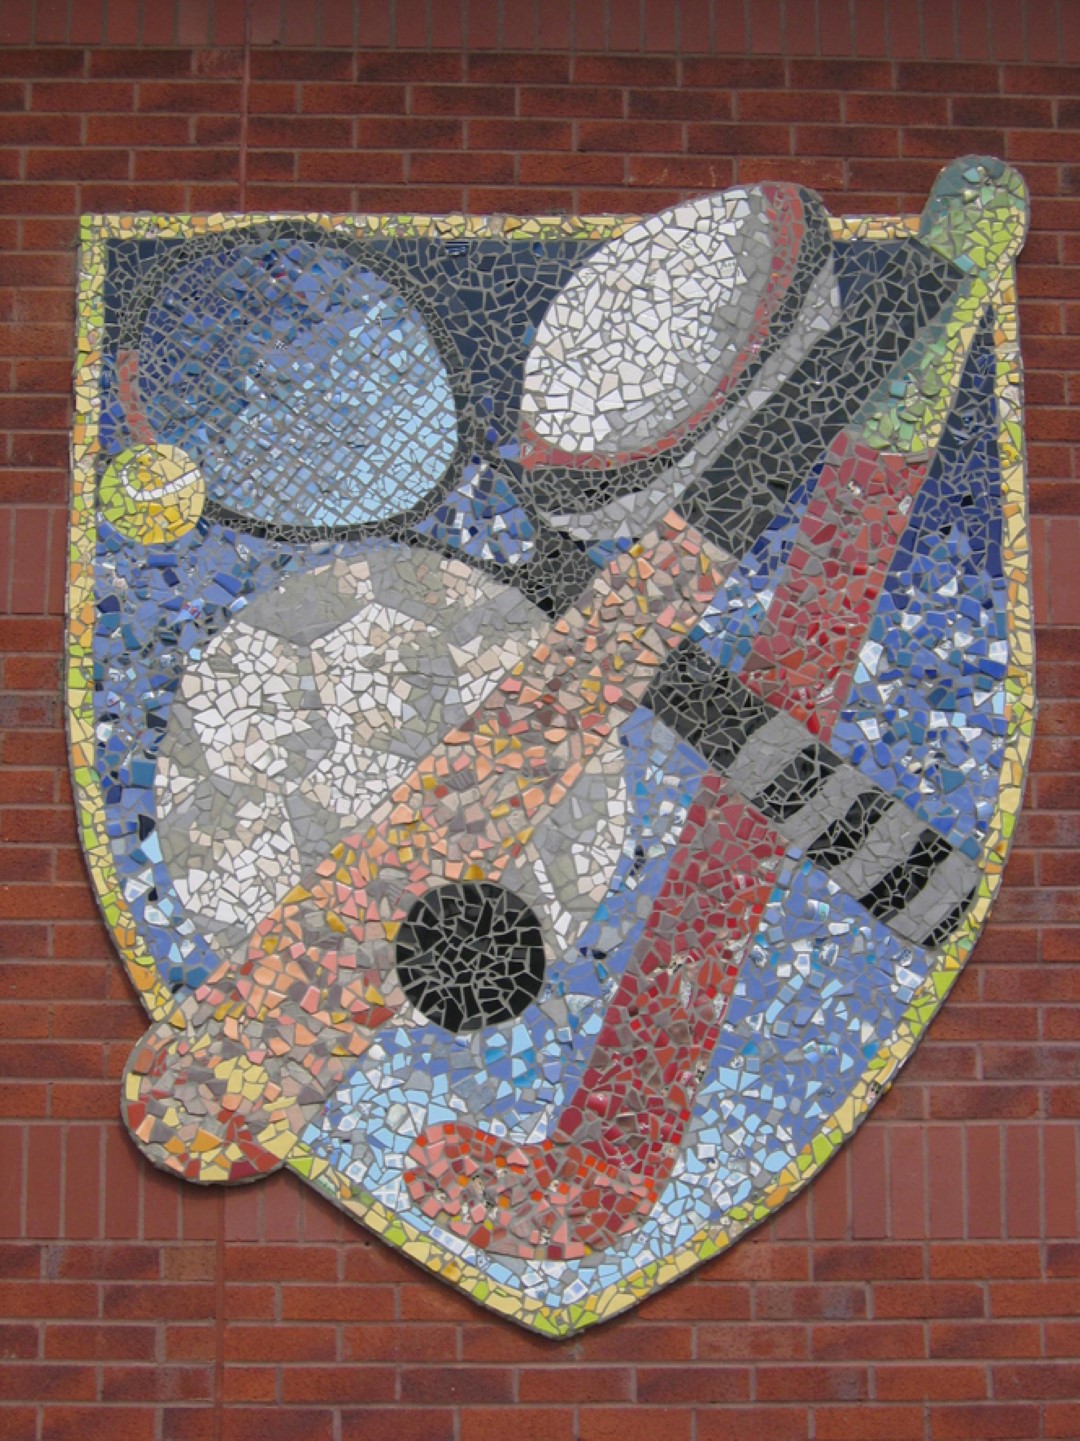 Completed School Mosaic